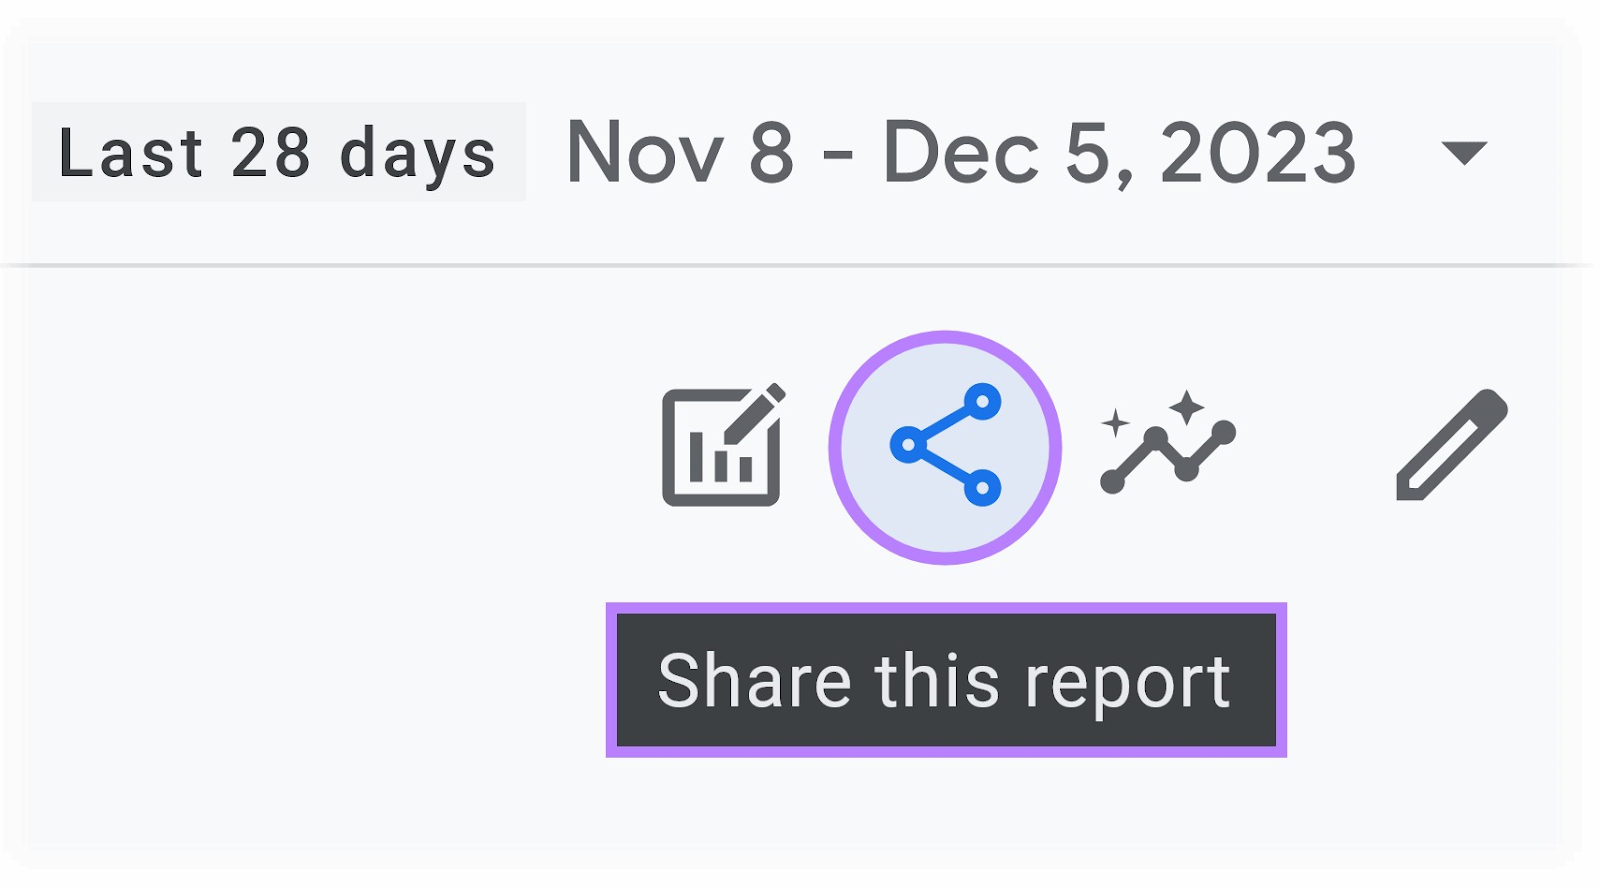 “Share this report” icon